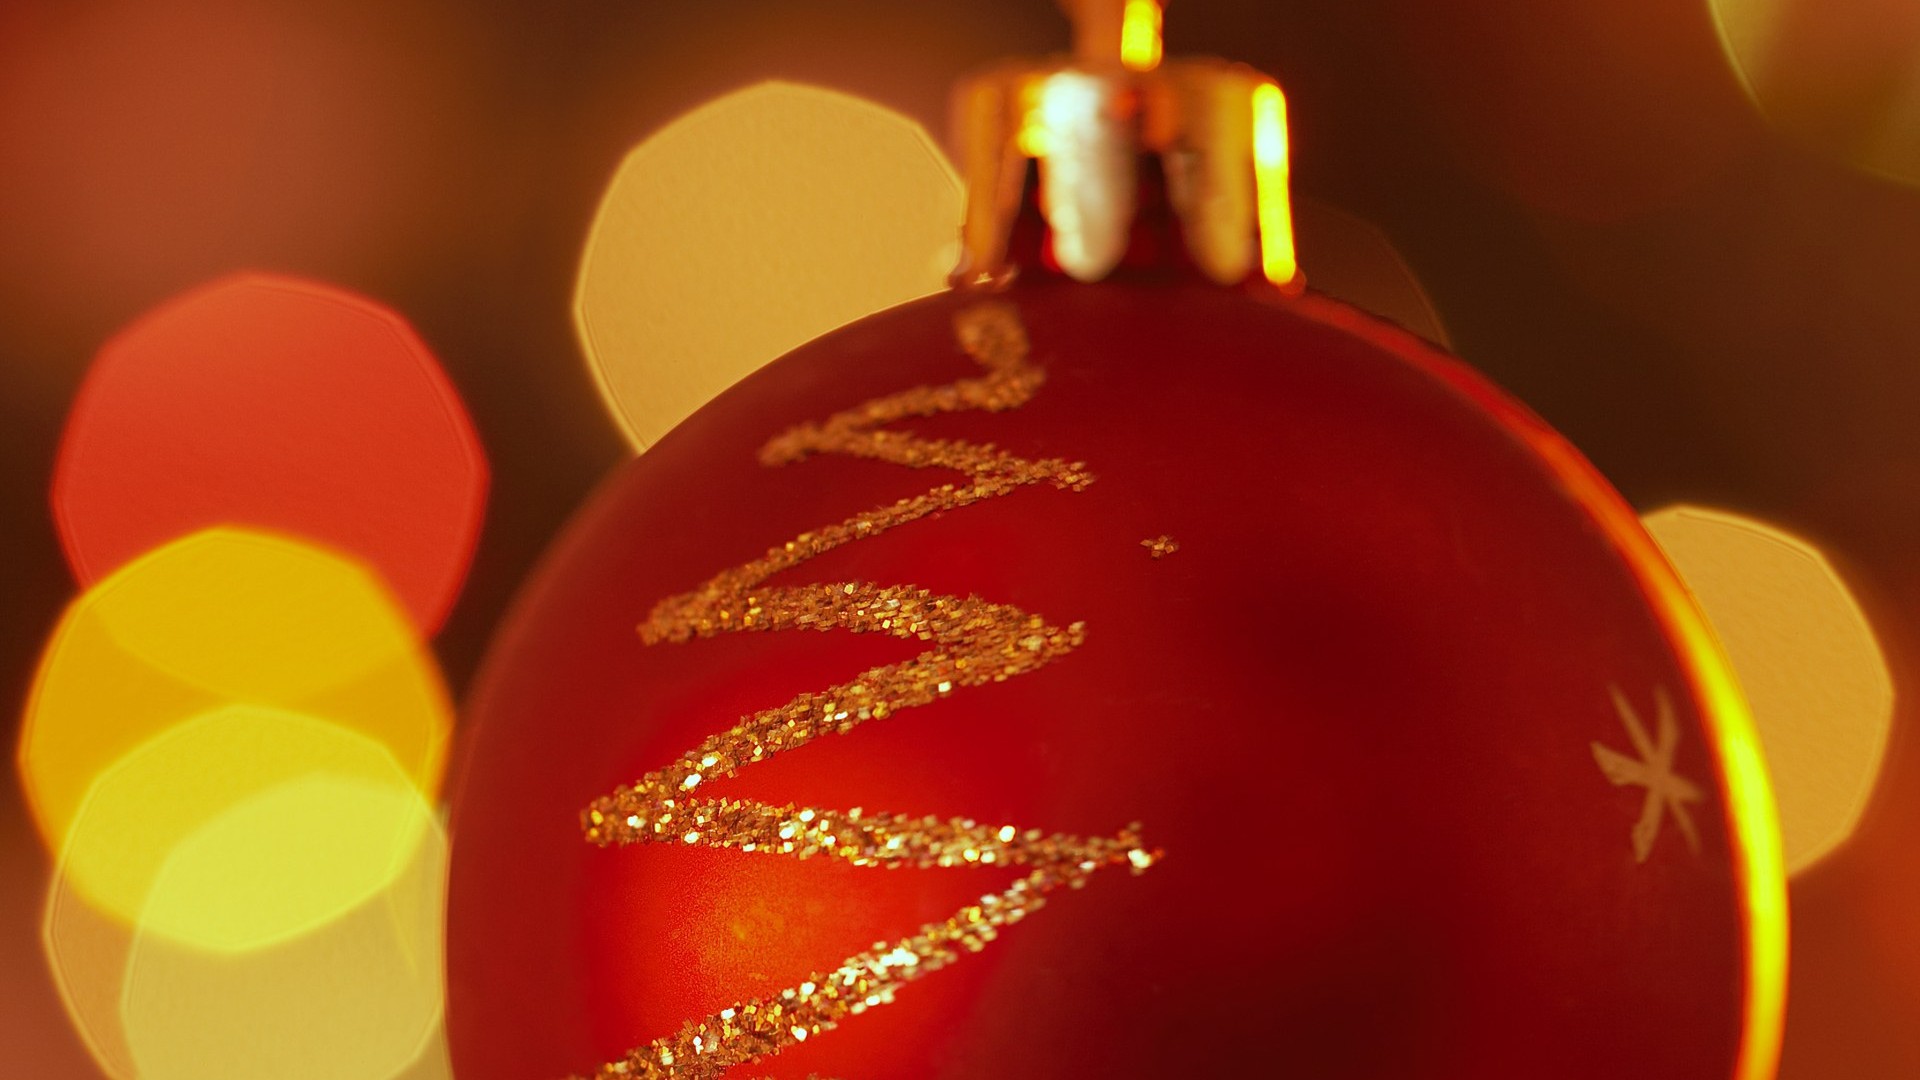 Happy Christmas decorations wallpapers #27 - 1920x1080